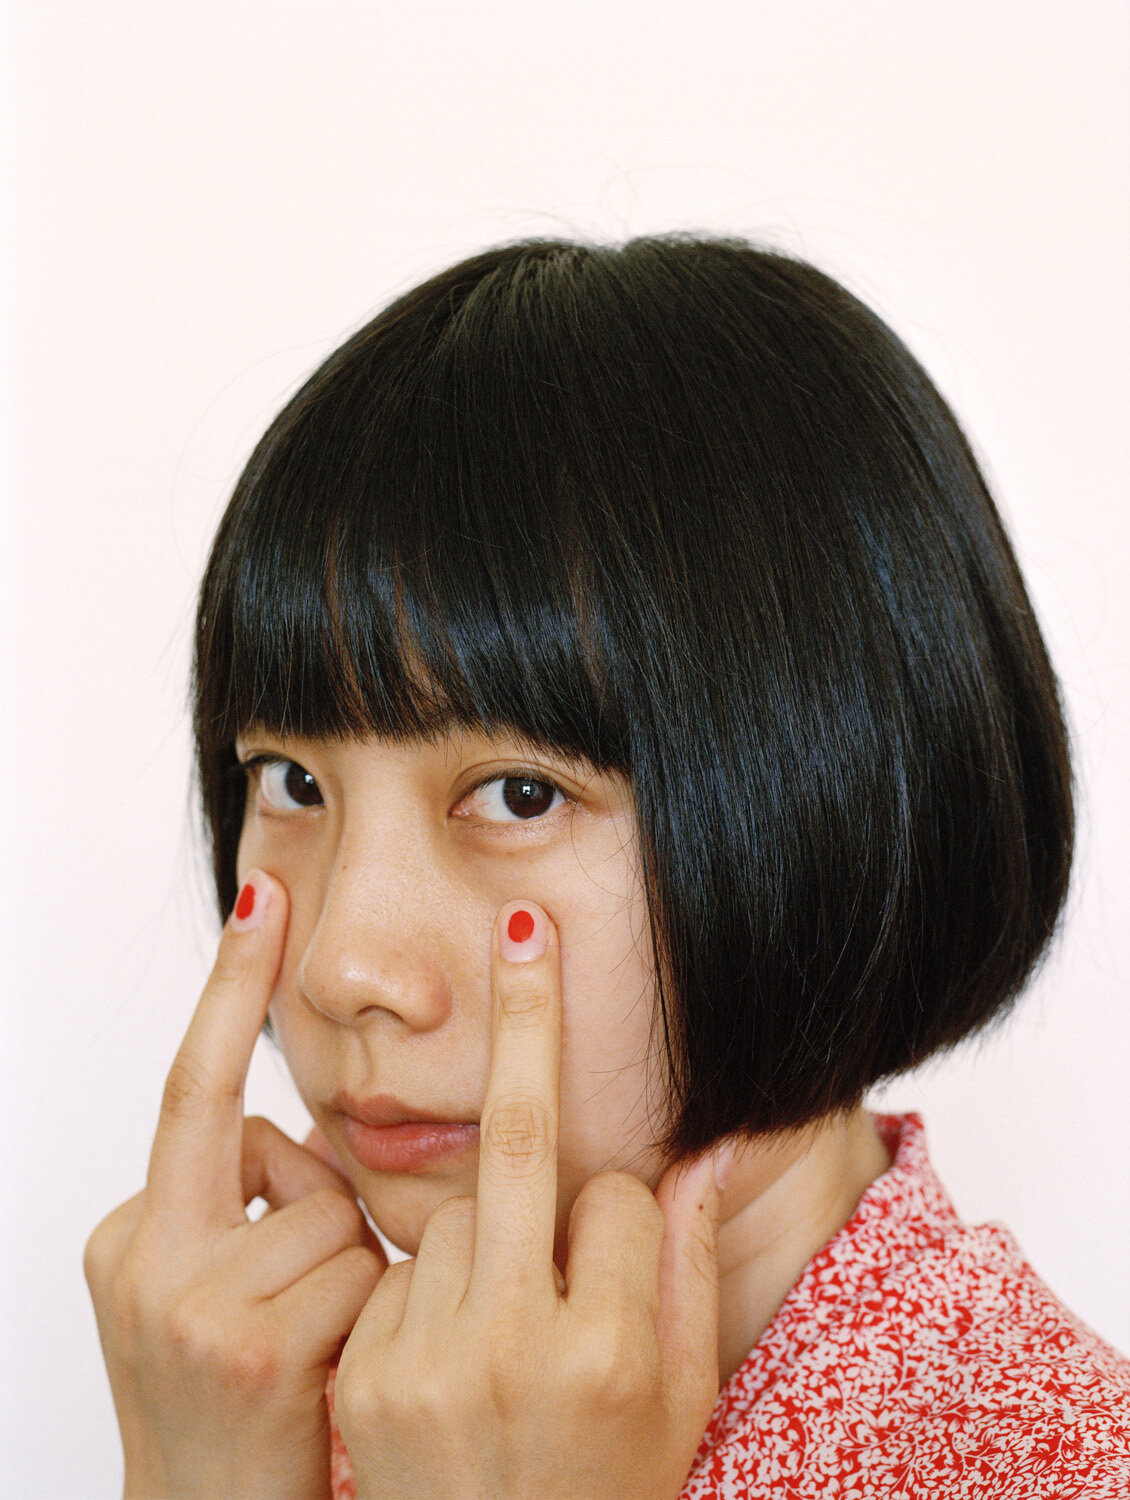 liao_2014_Red Nails.jpg